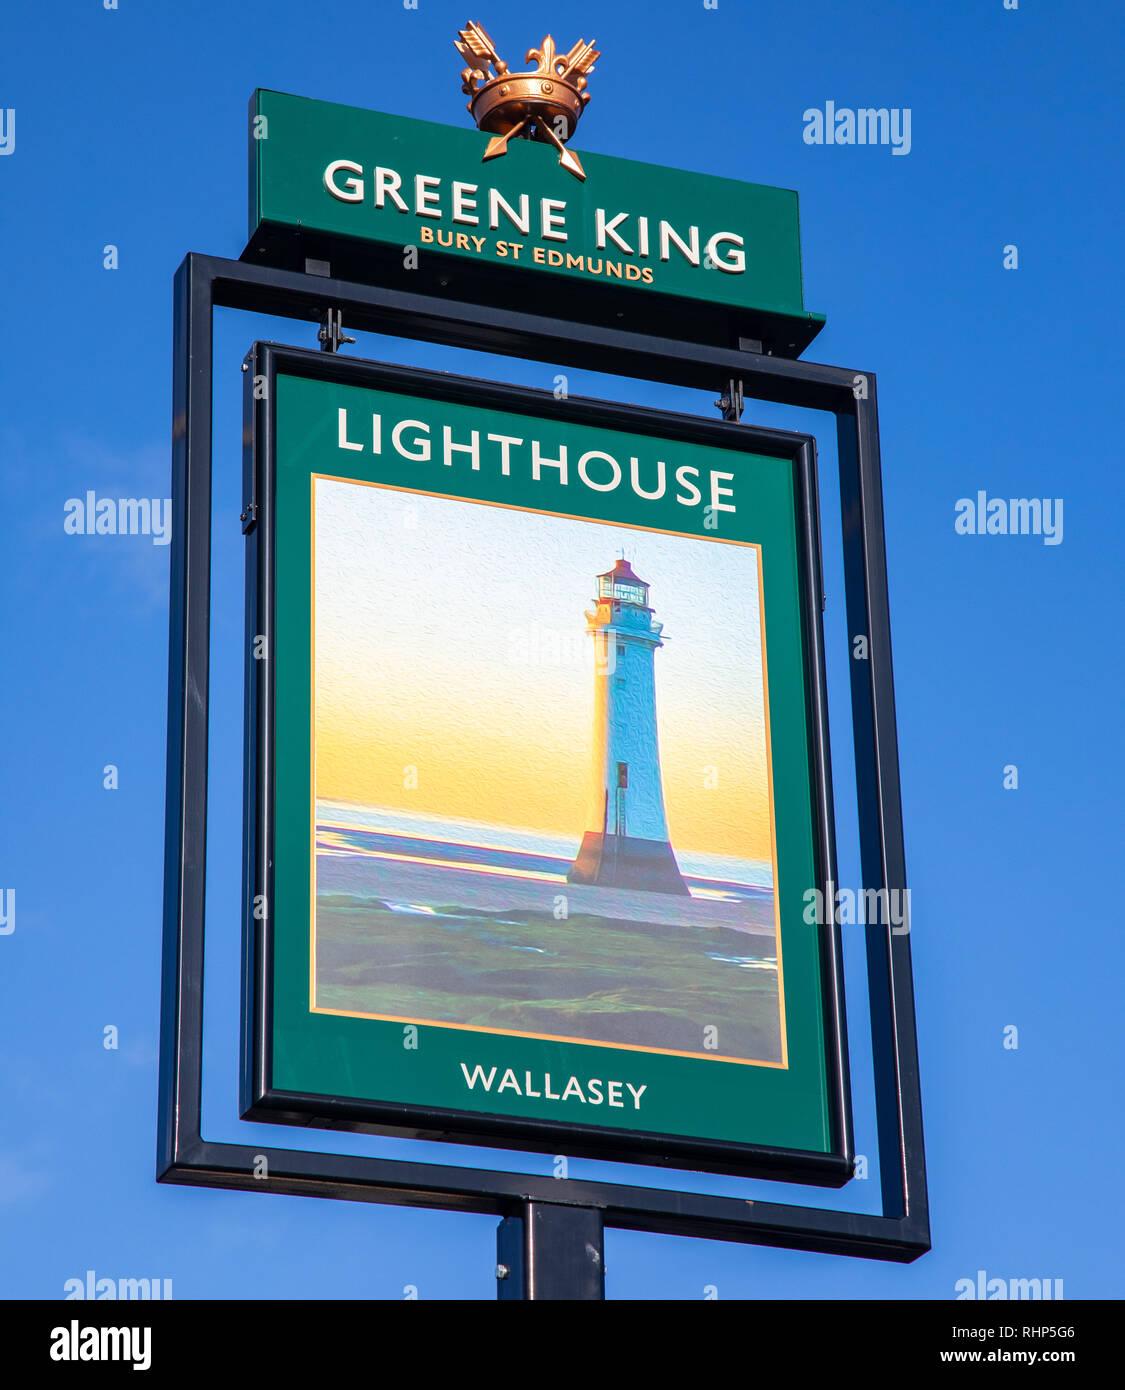 Exterior sign for The Lighthouse public house Wallasey Village part of the Greene King pub and restaurant chain Wallasey Village February 2019 Stock Photo